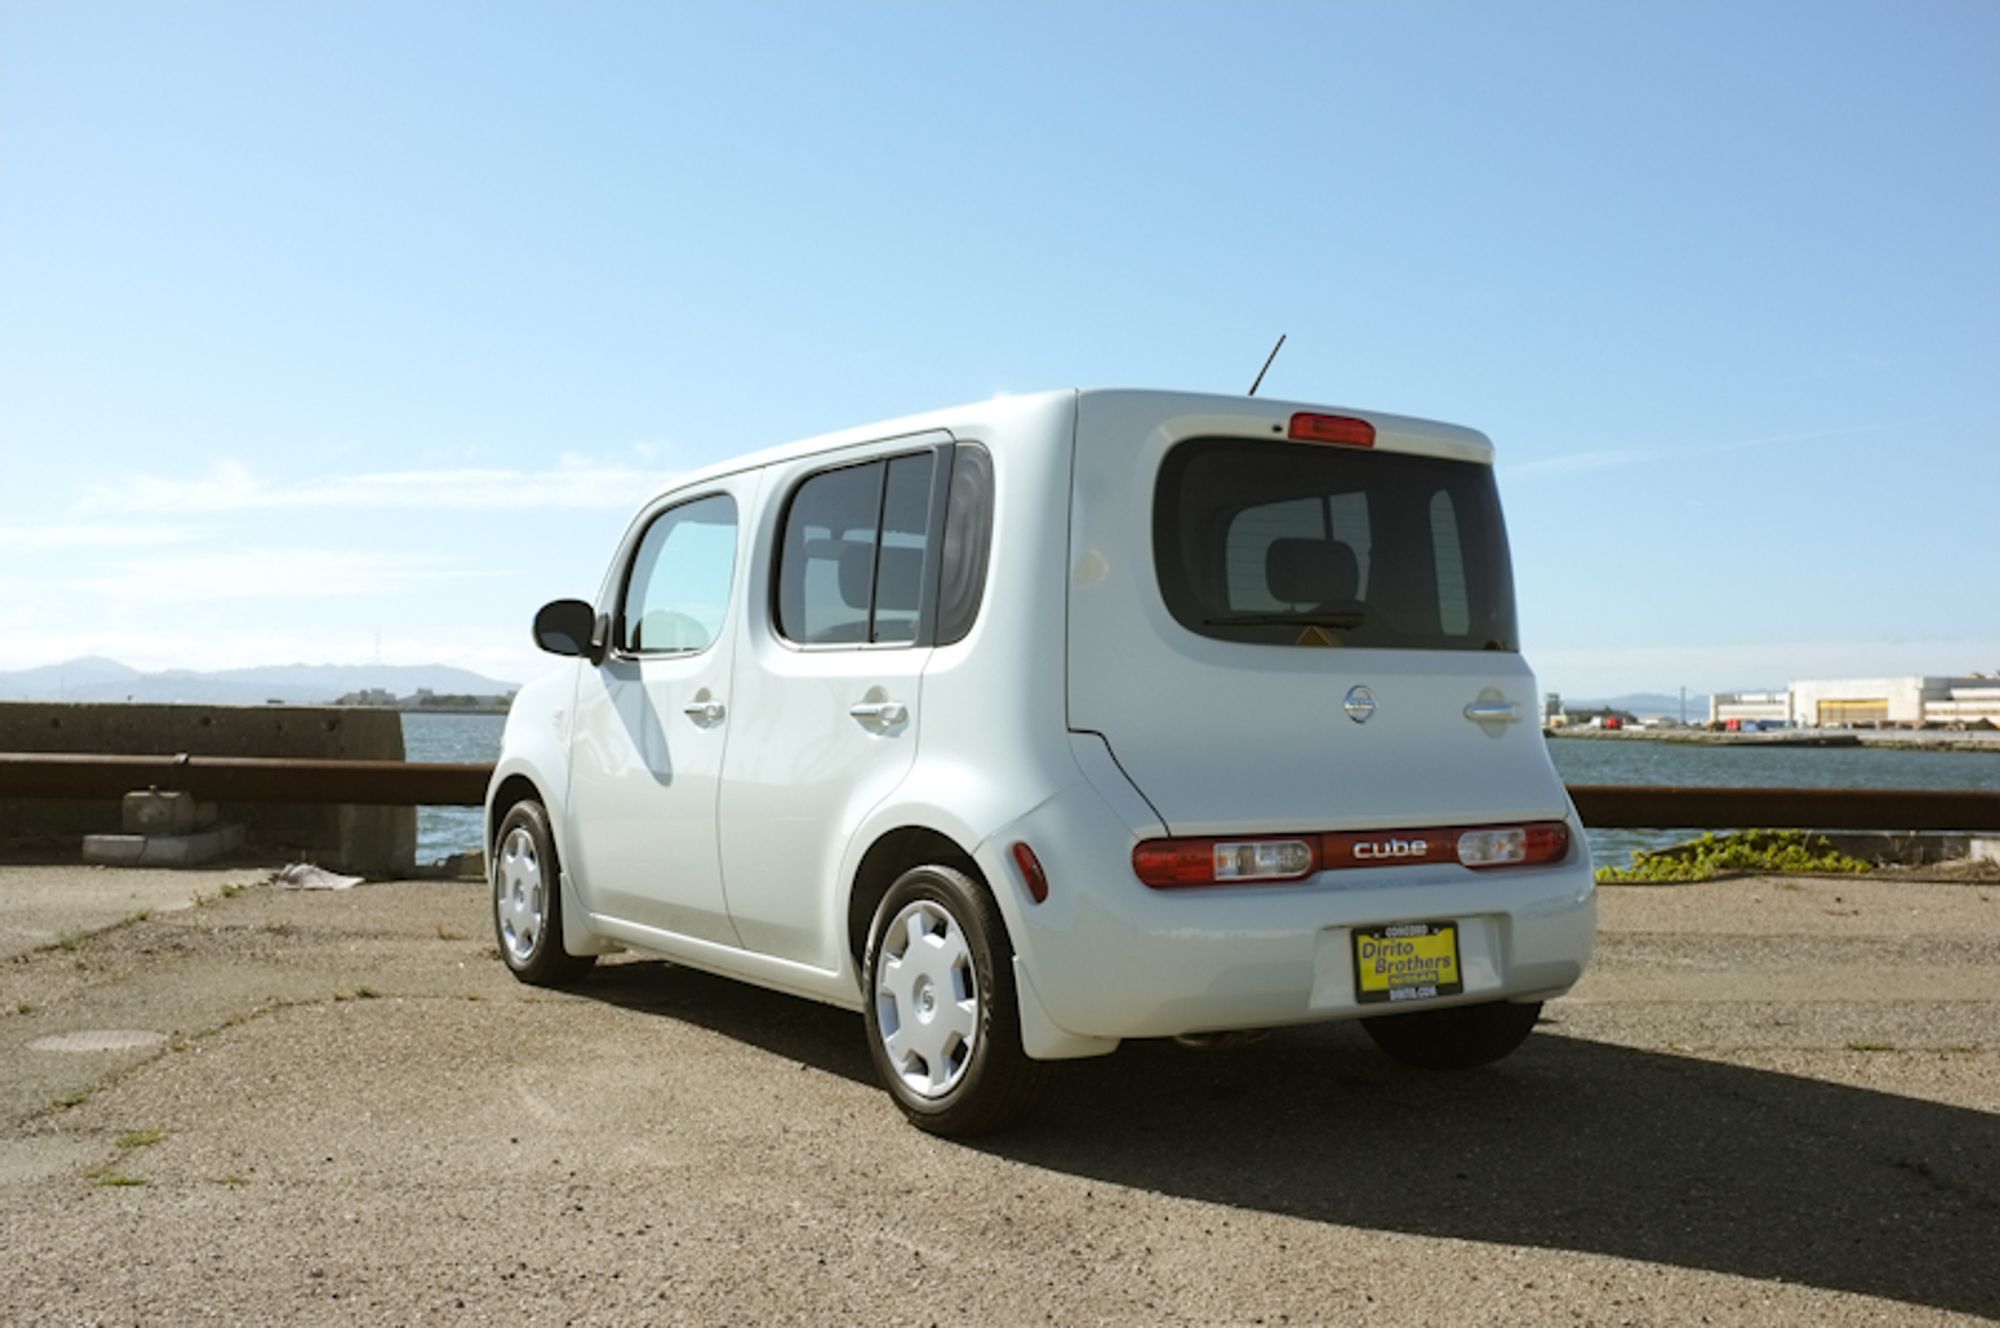 2011 Nissan Cube, by Andrew Kim